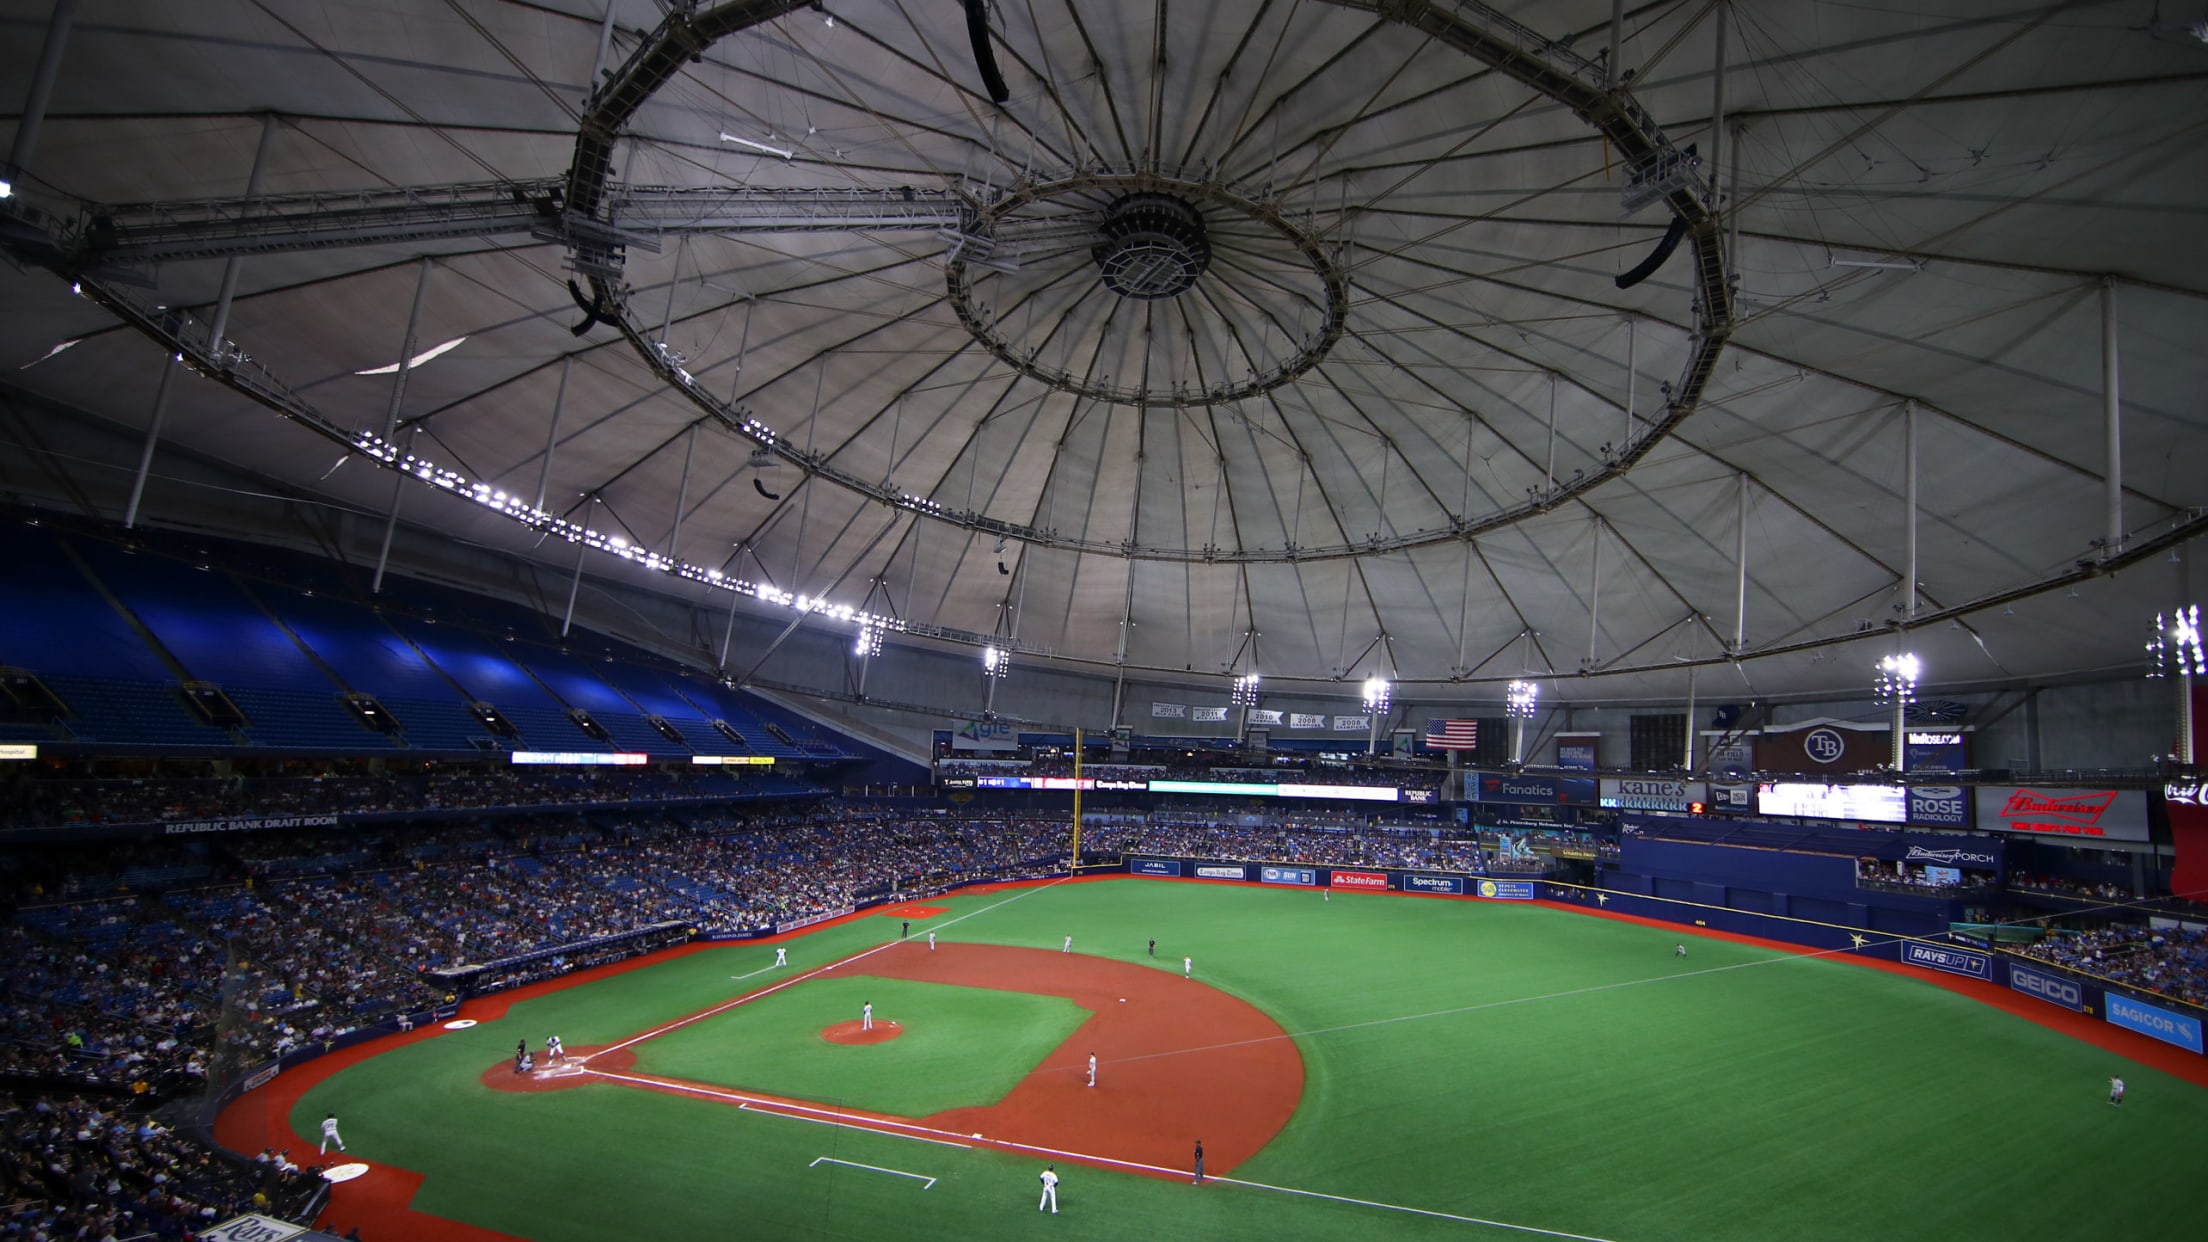 Rays offering thousands of upper deck tickets for Yankees series